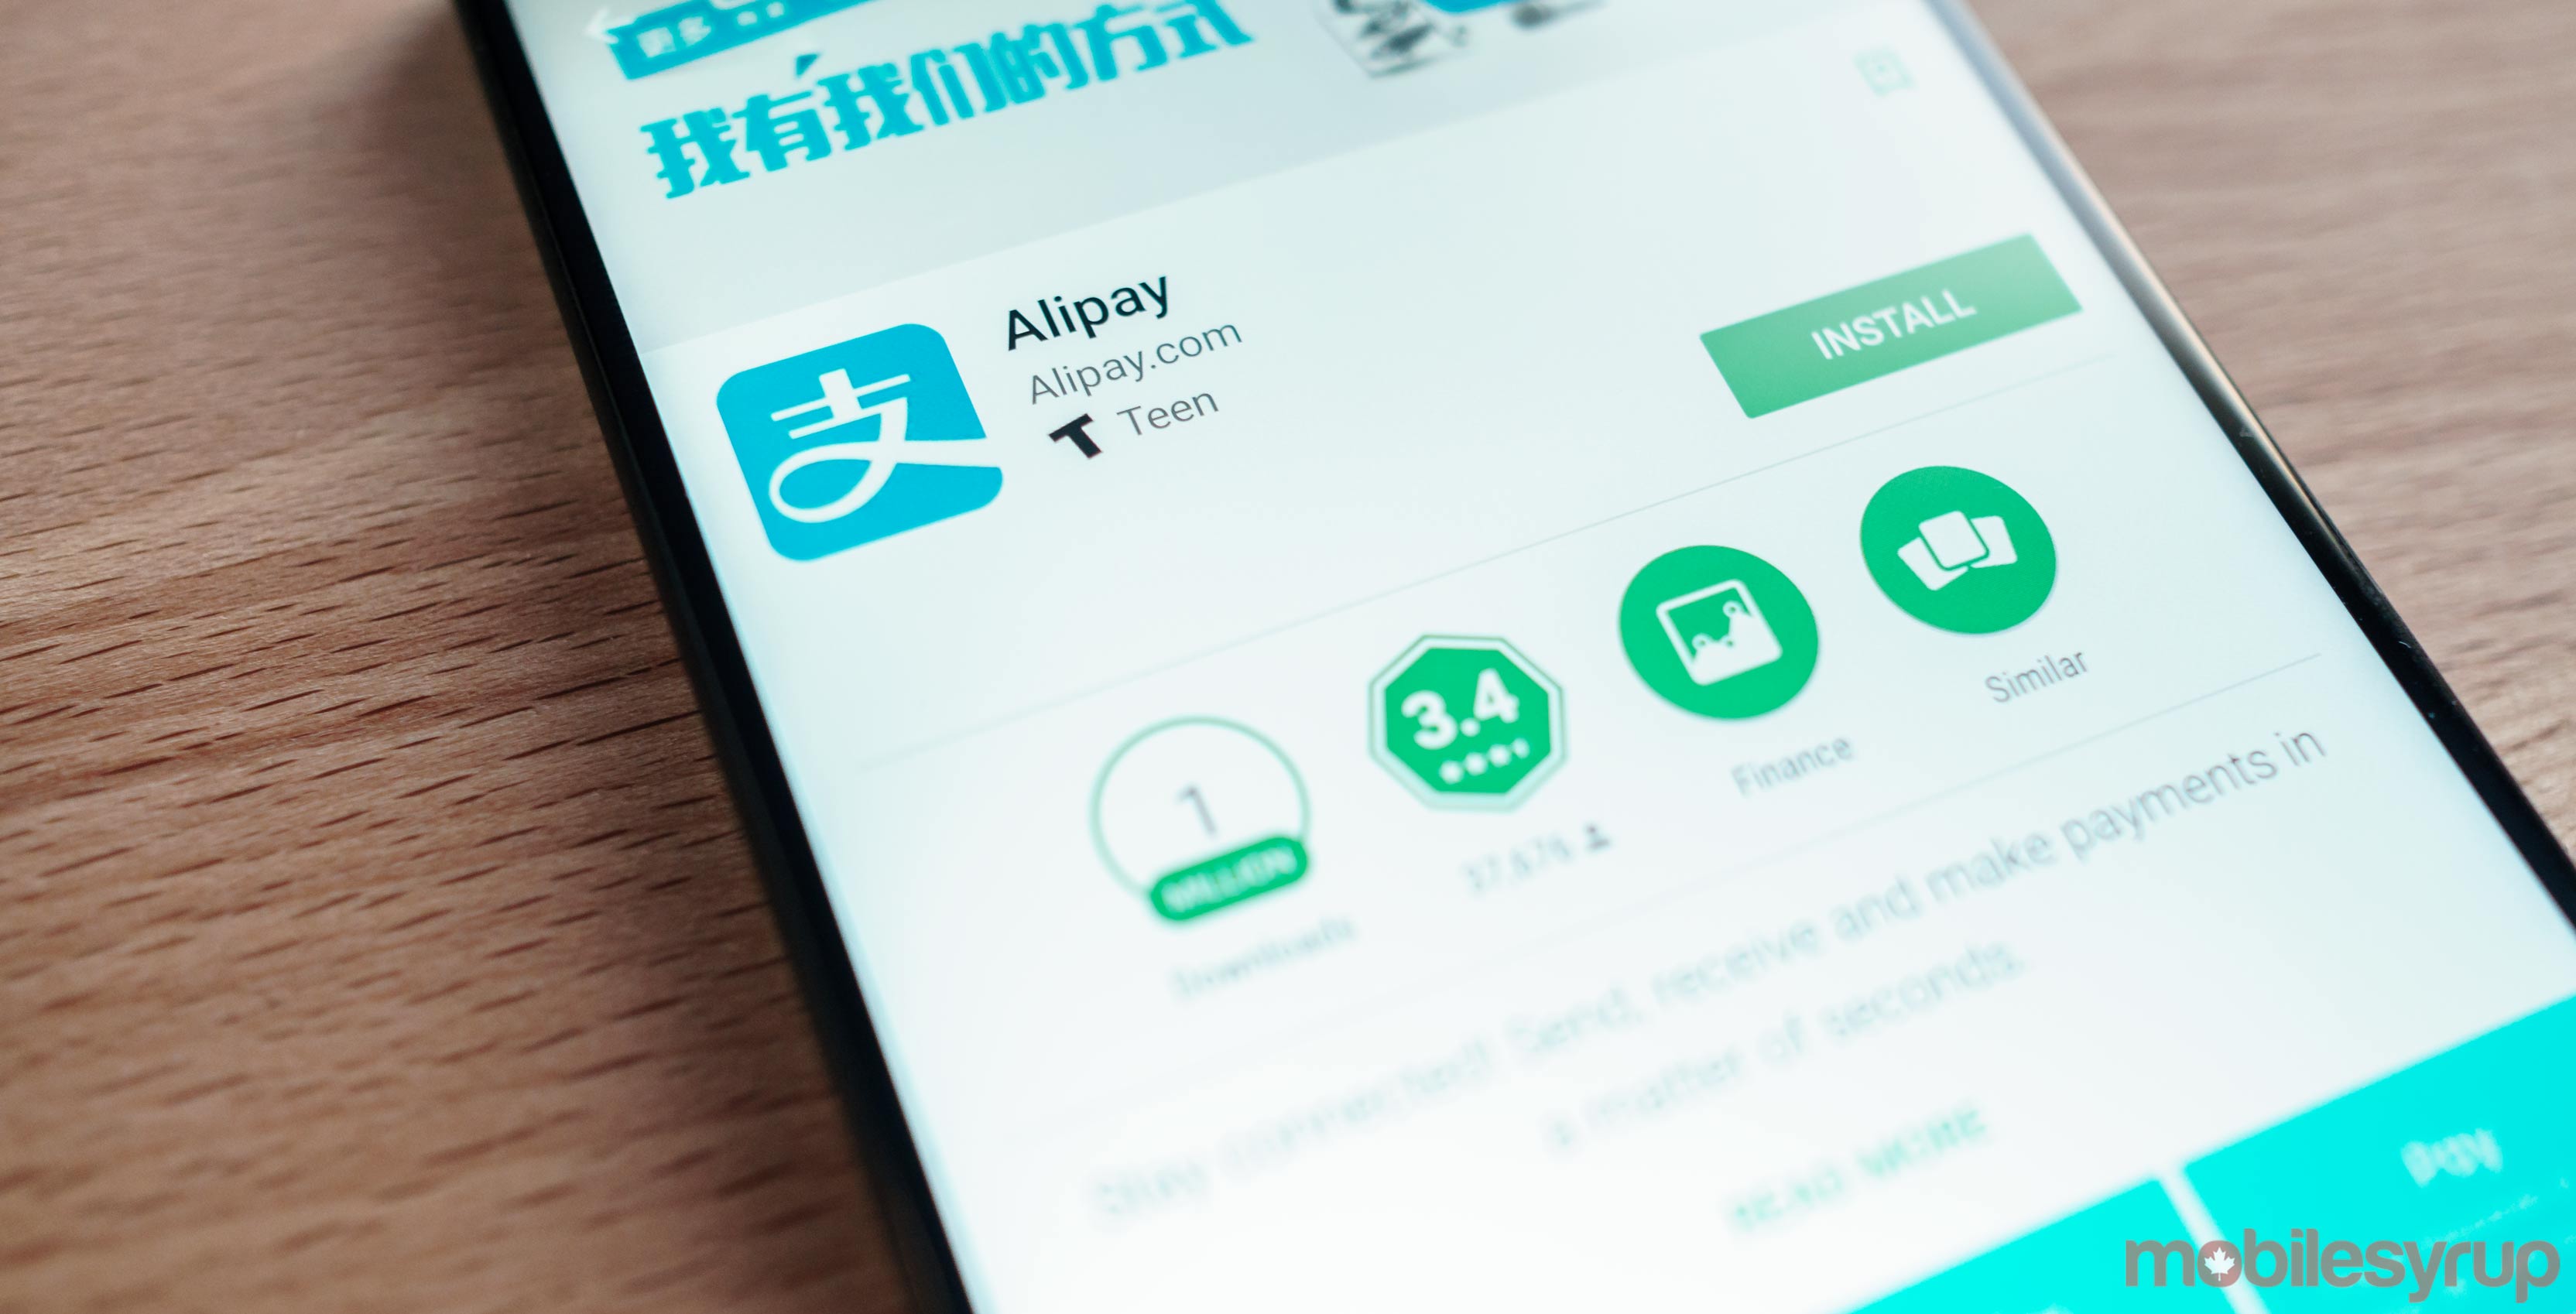 The Google Pay Store page for Alipay, Alibaba's mobile payments platform